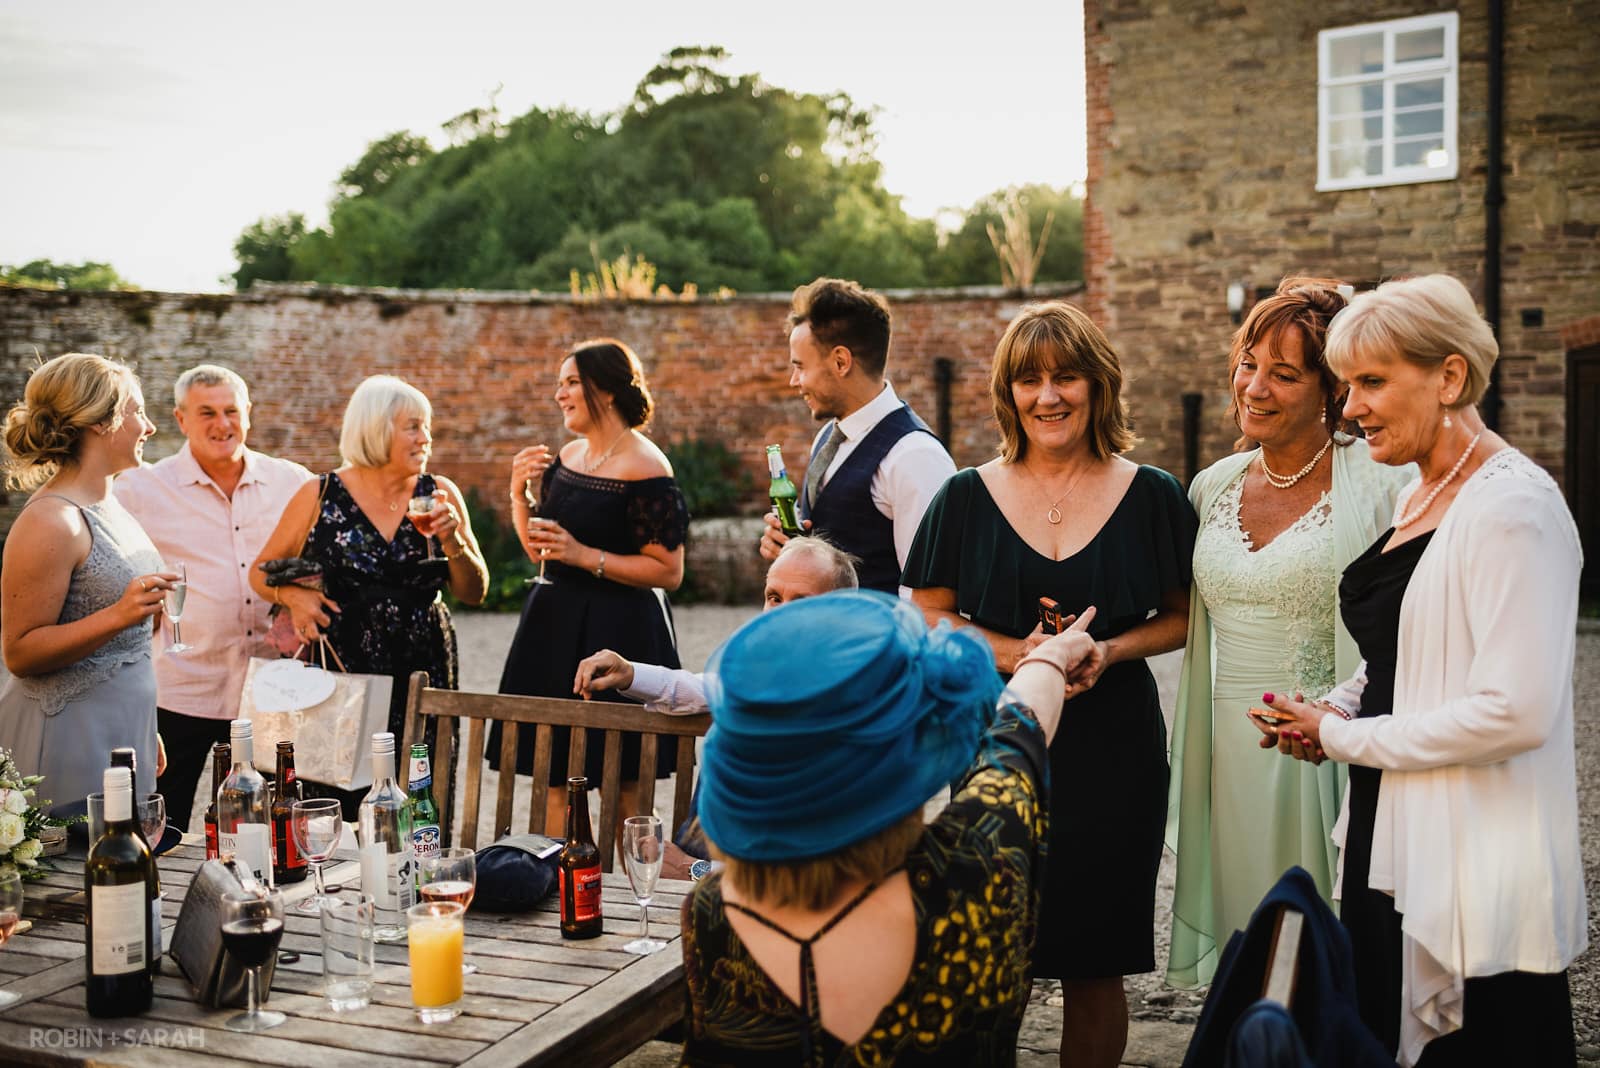 Wedding guests relaxing in the evening sunlight at Delbury Hall